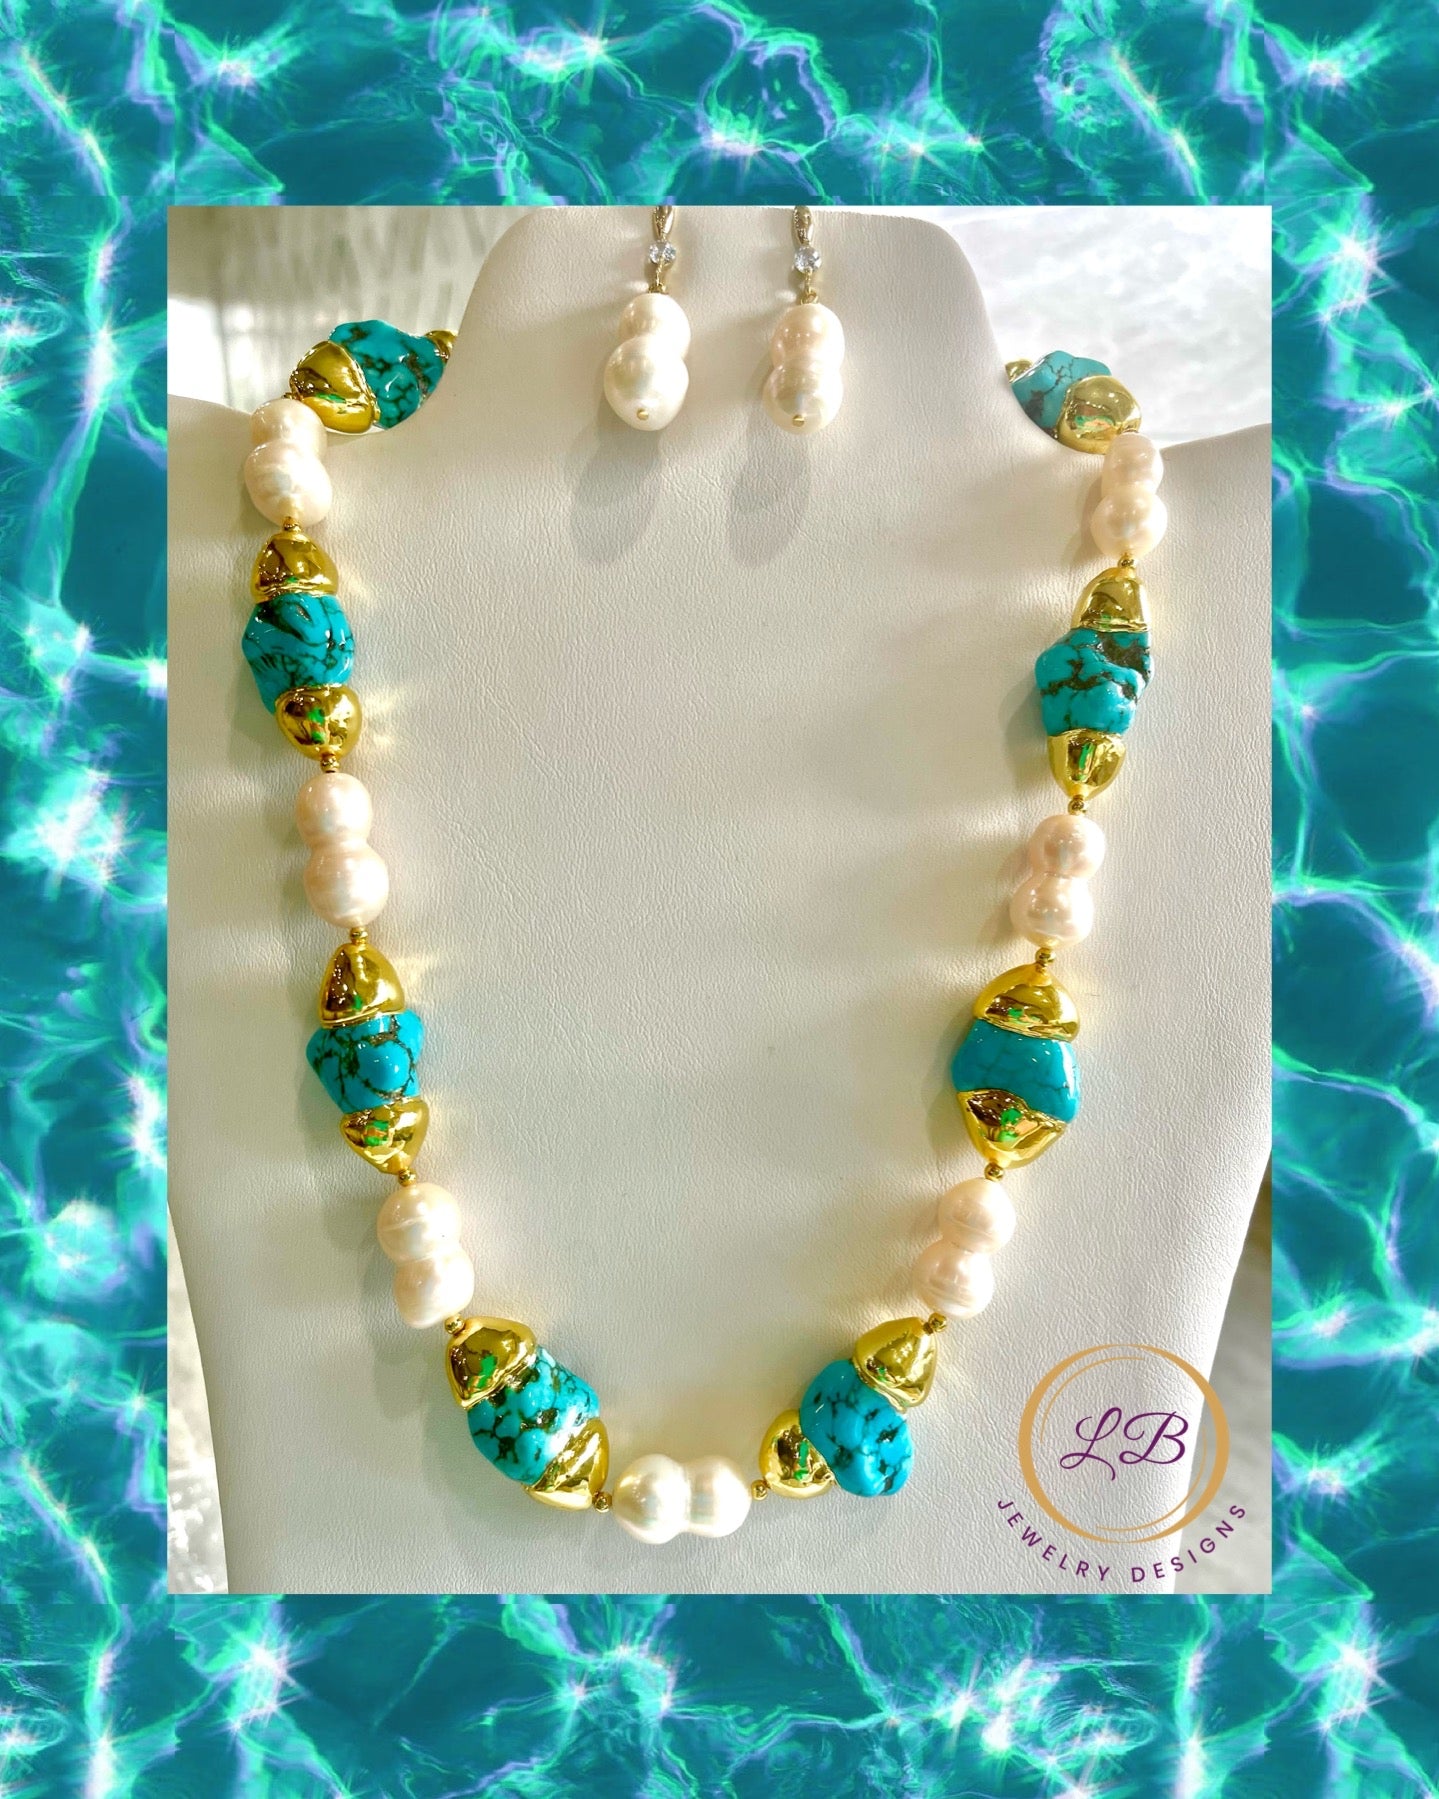 Twin Pearls and Turquoise Gemstones Statement Necklace/Earrings Set 18”